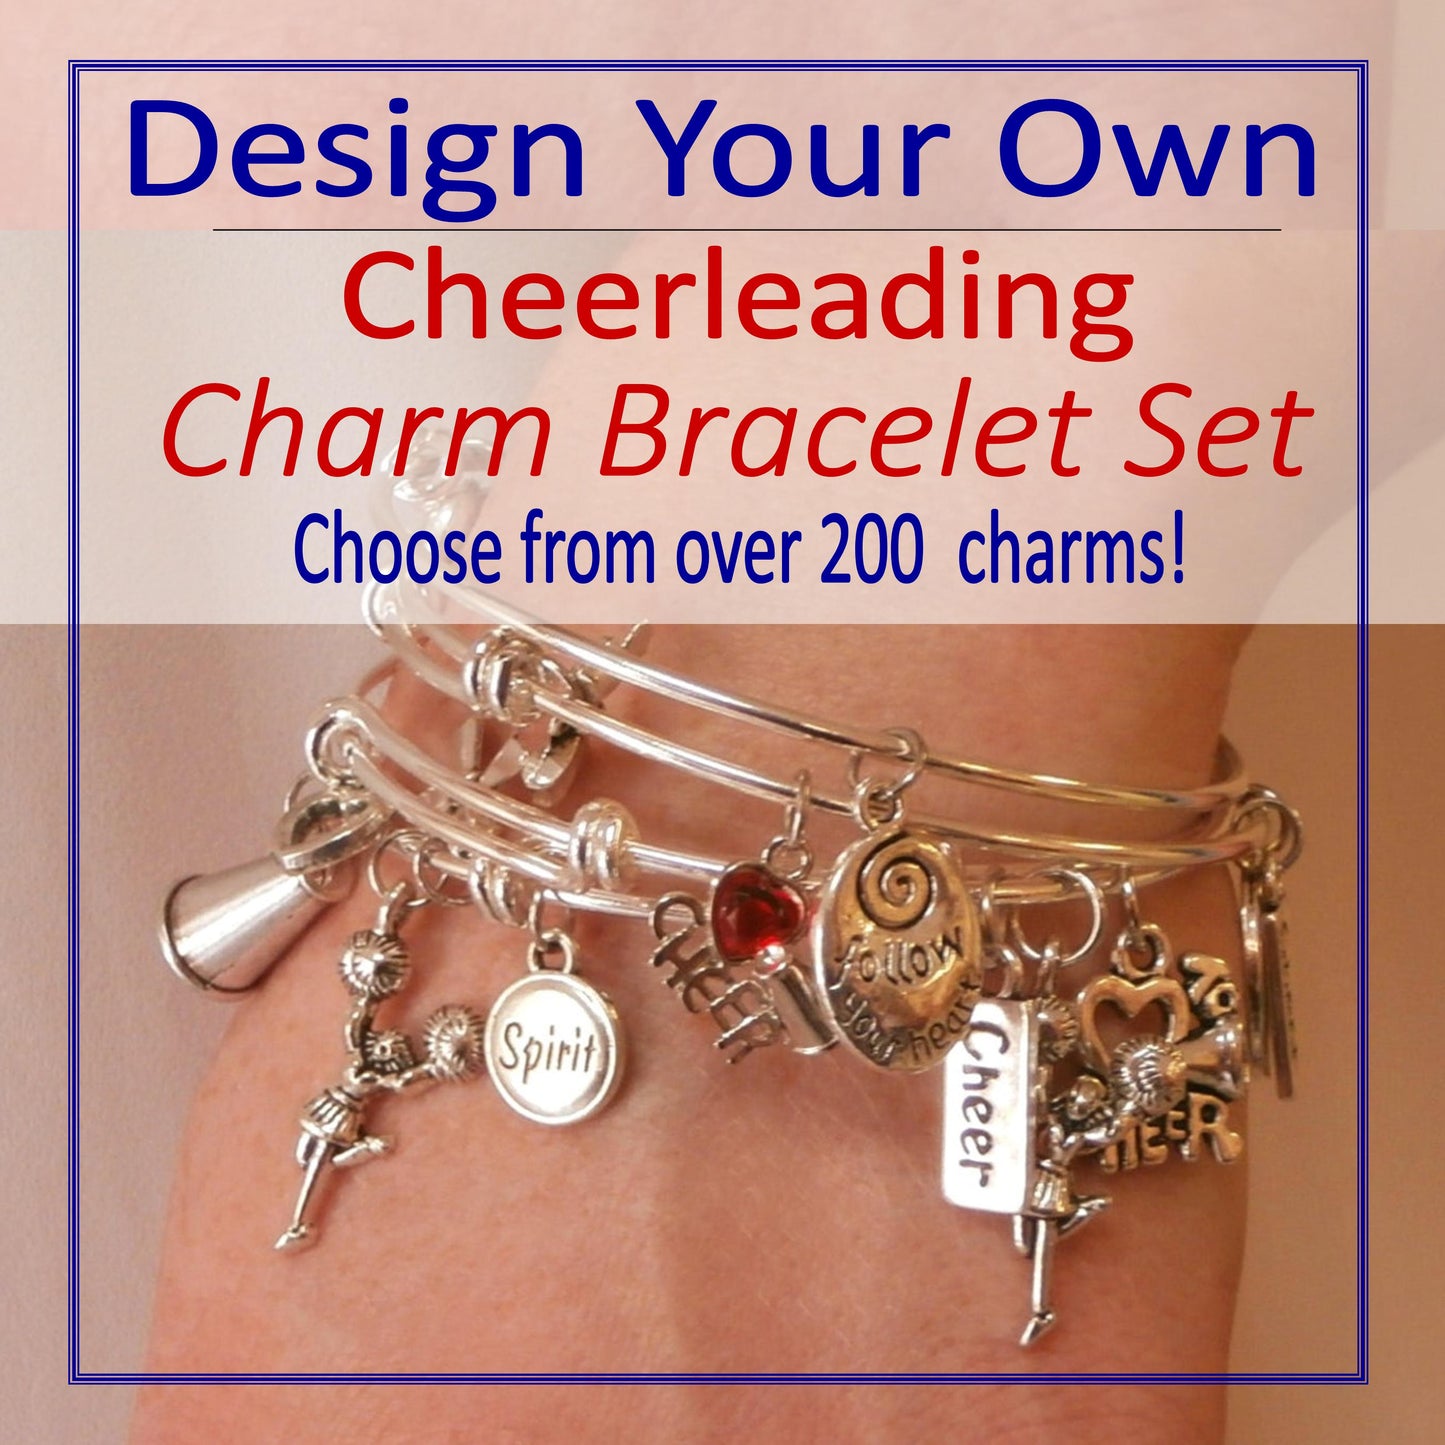 Design Your Own Cheerleading Charm Bracelet SET - Cheer and Dance On Demand